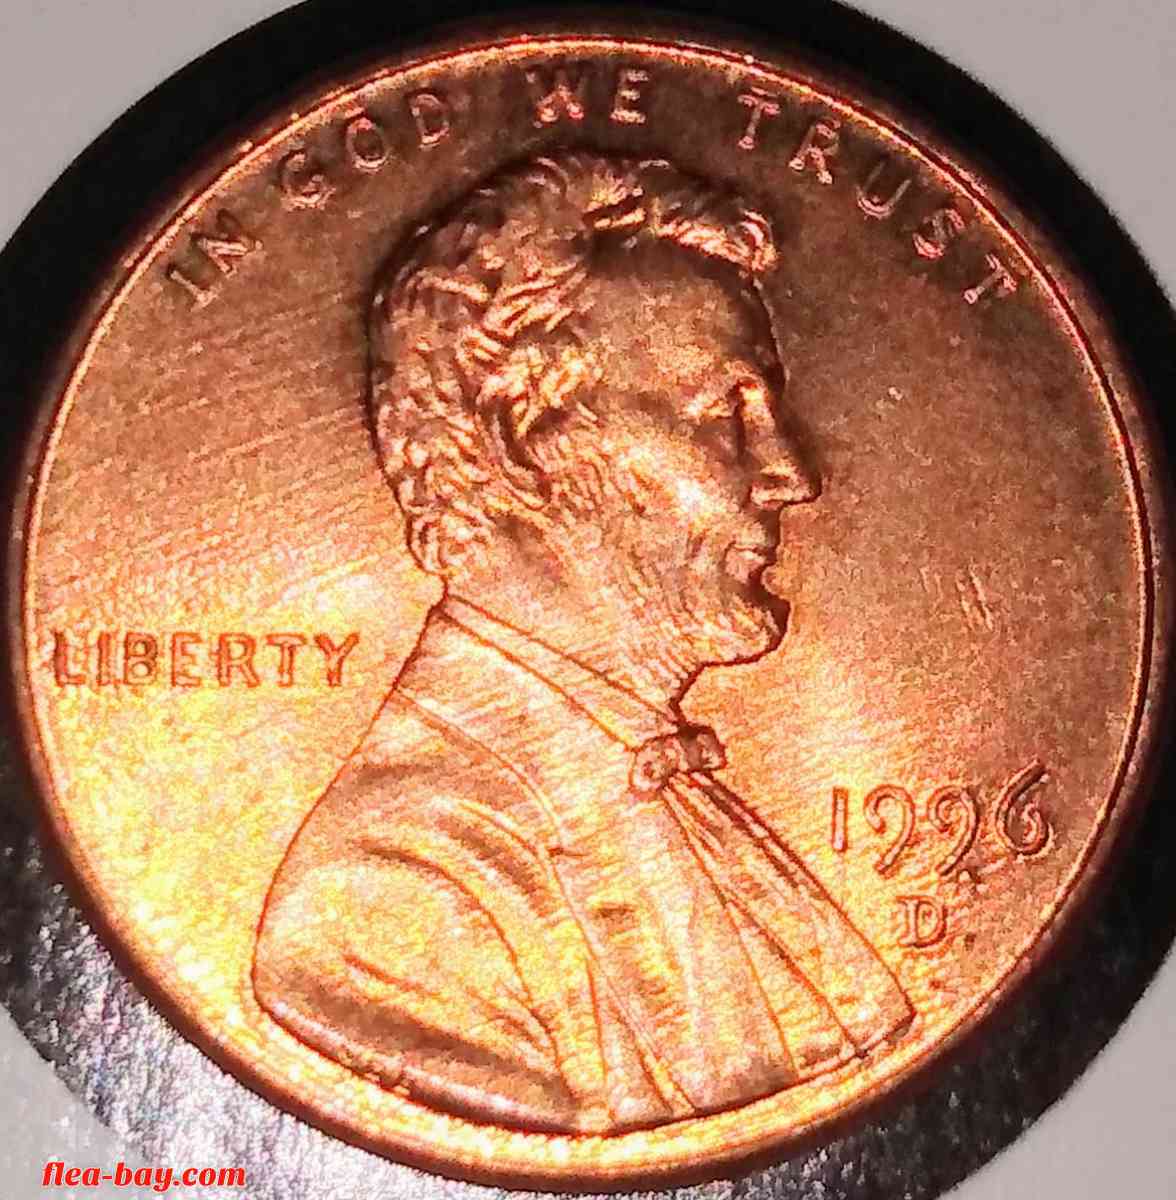 1996-D/DDO/Rev; RpmUS.Minted; Lincoln/Variety and Error coin